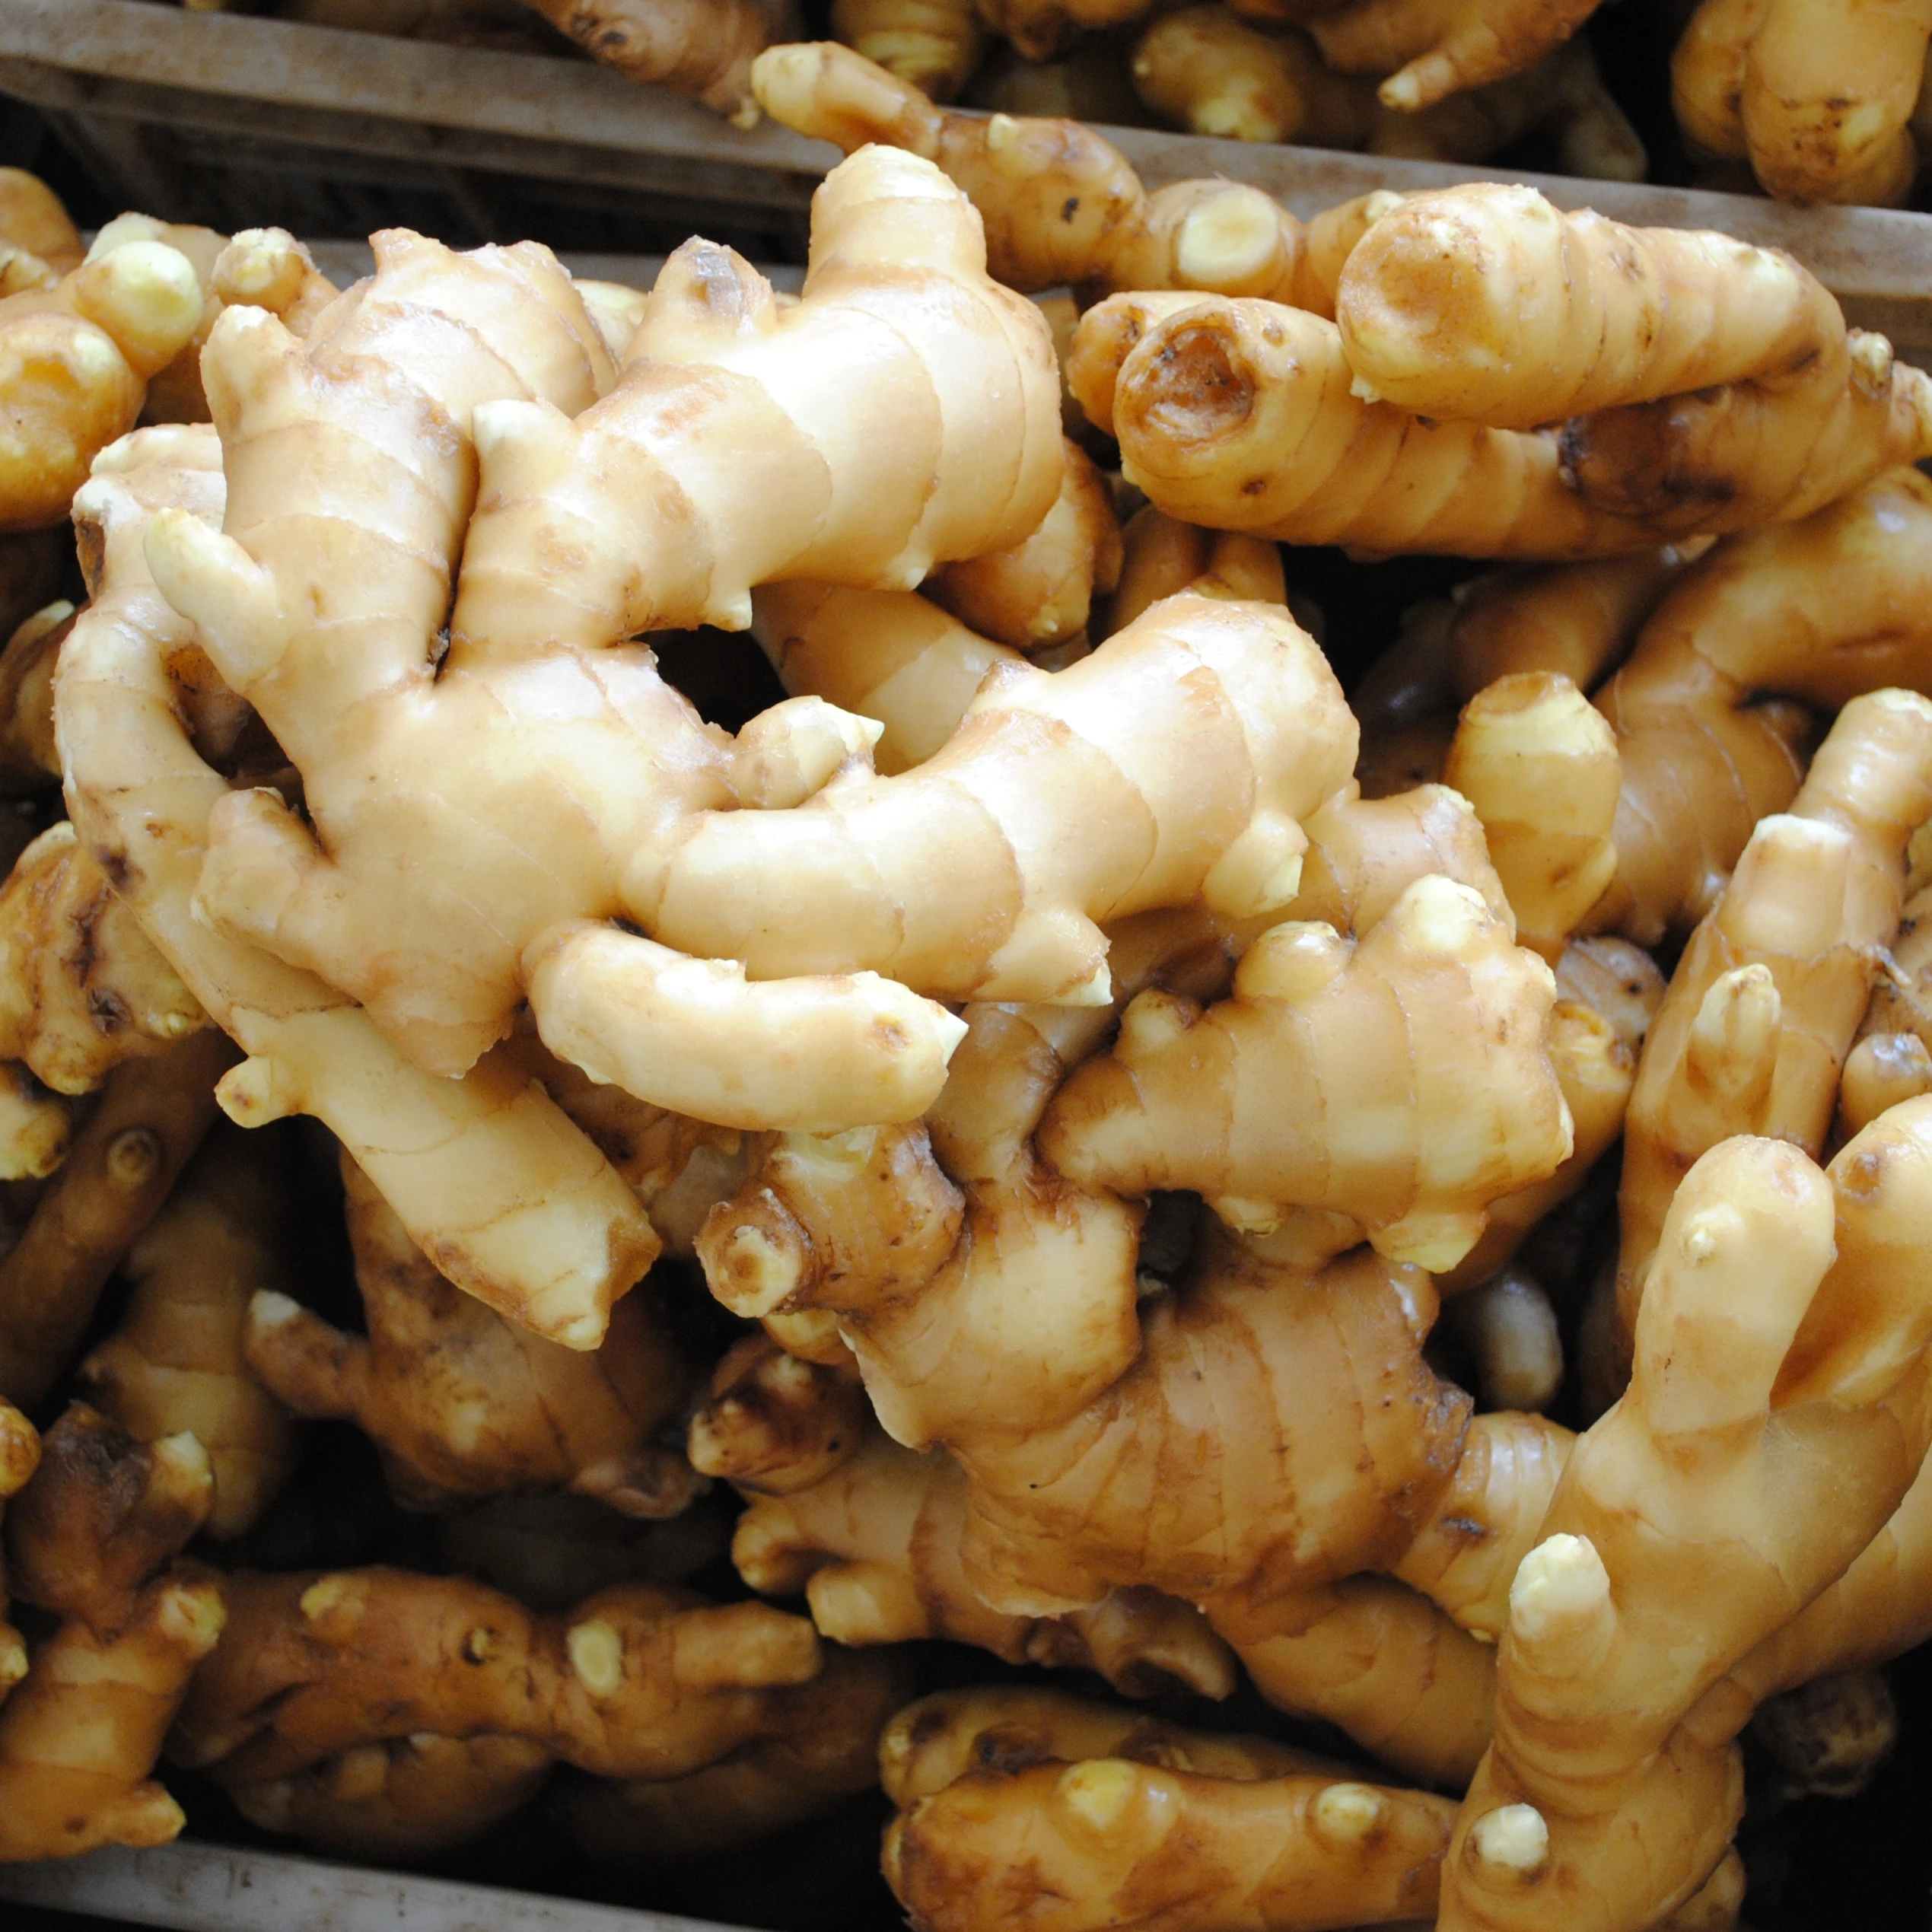 Hot Sale 2020 China/Chinese New Crop Fresh Ginger in Good Taste